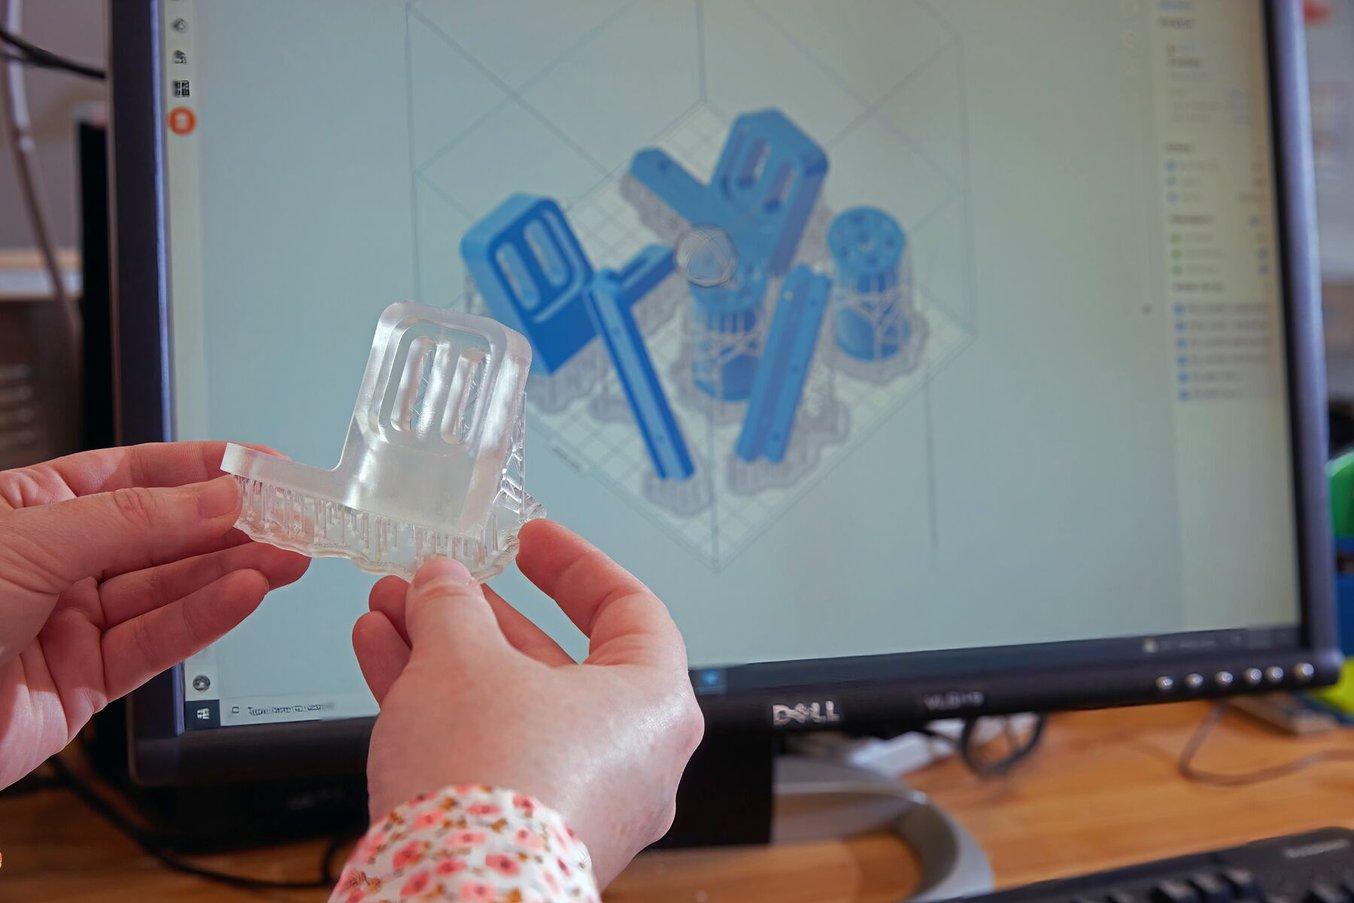 A person’s hands hold a translucent 3D-printed part, in front of a computer showing the part and several others as set up for printing.